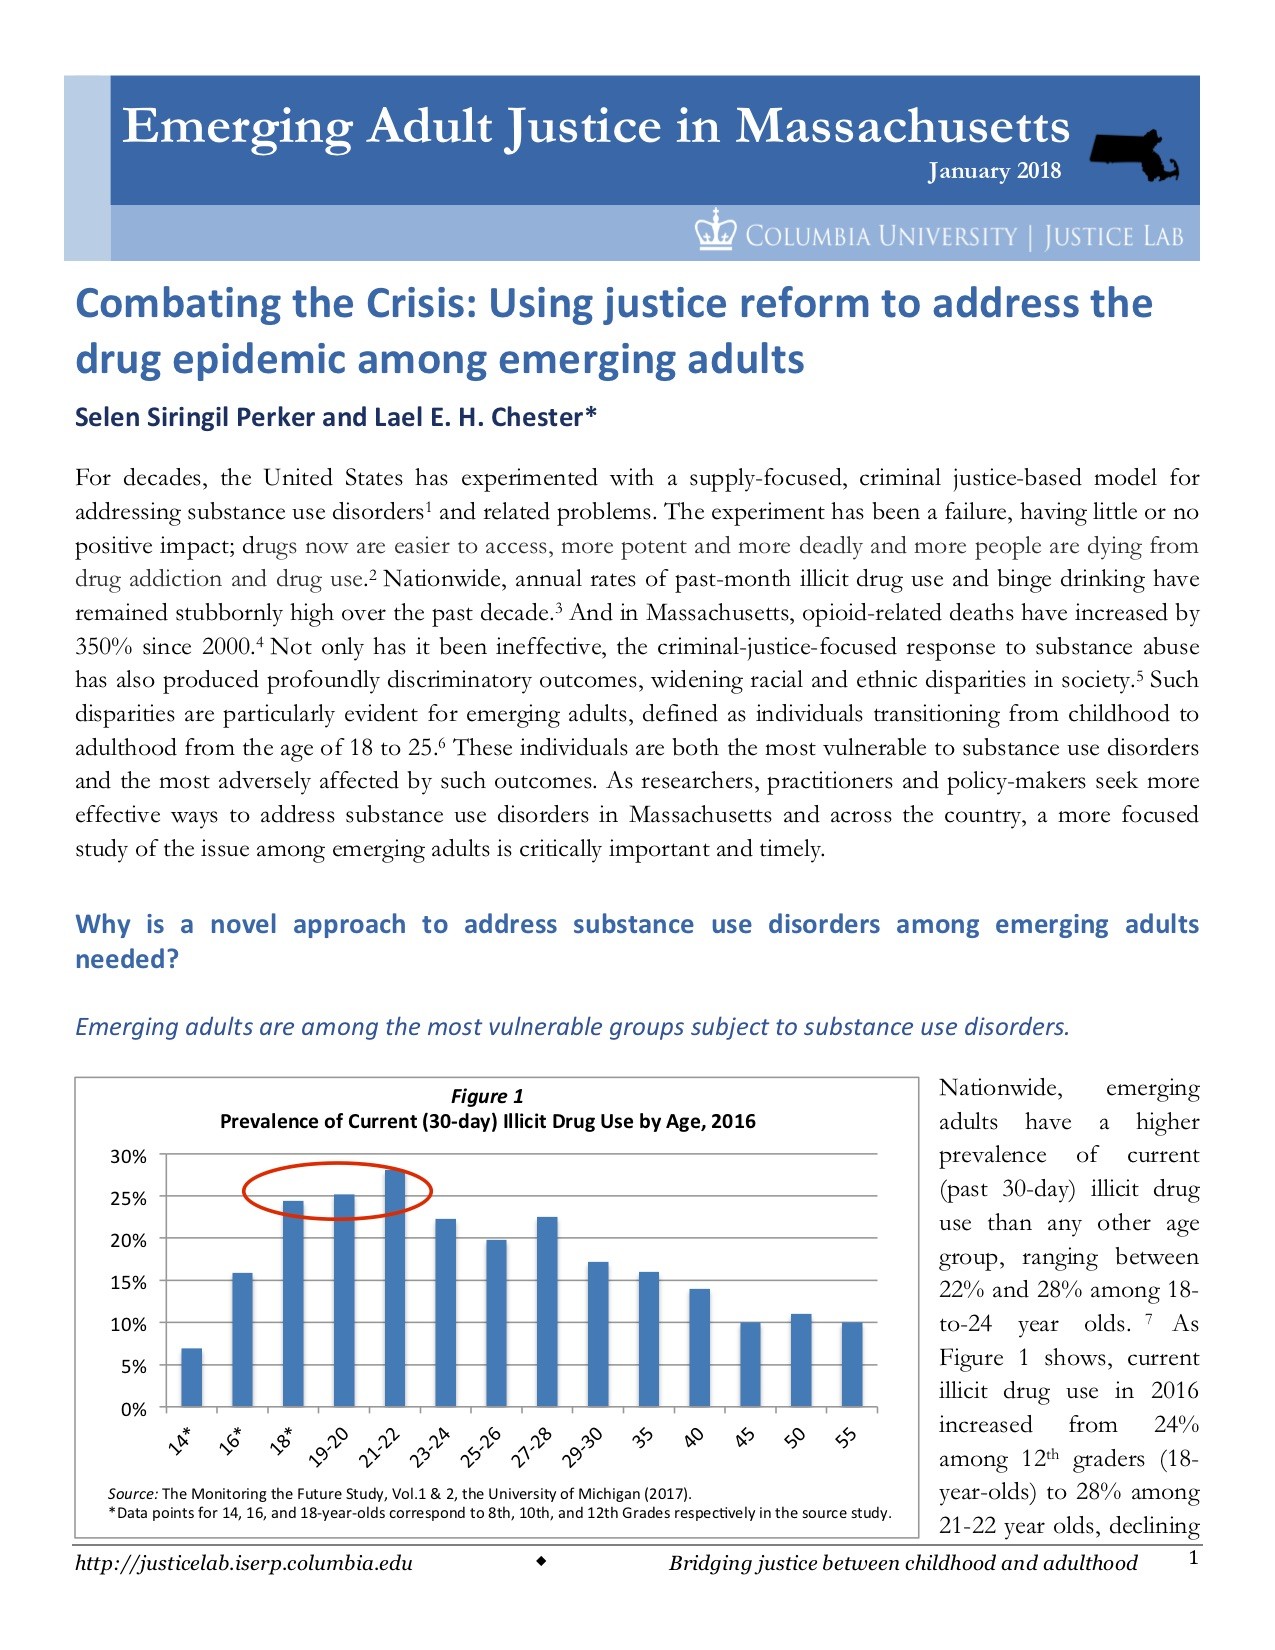 Combating the Crisis: Using justice reform to address the drug epidemic among emerging adults